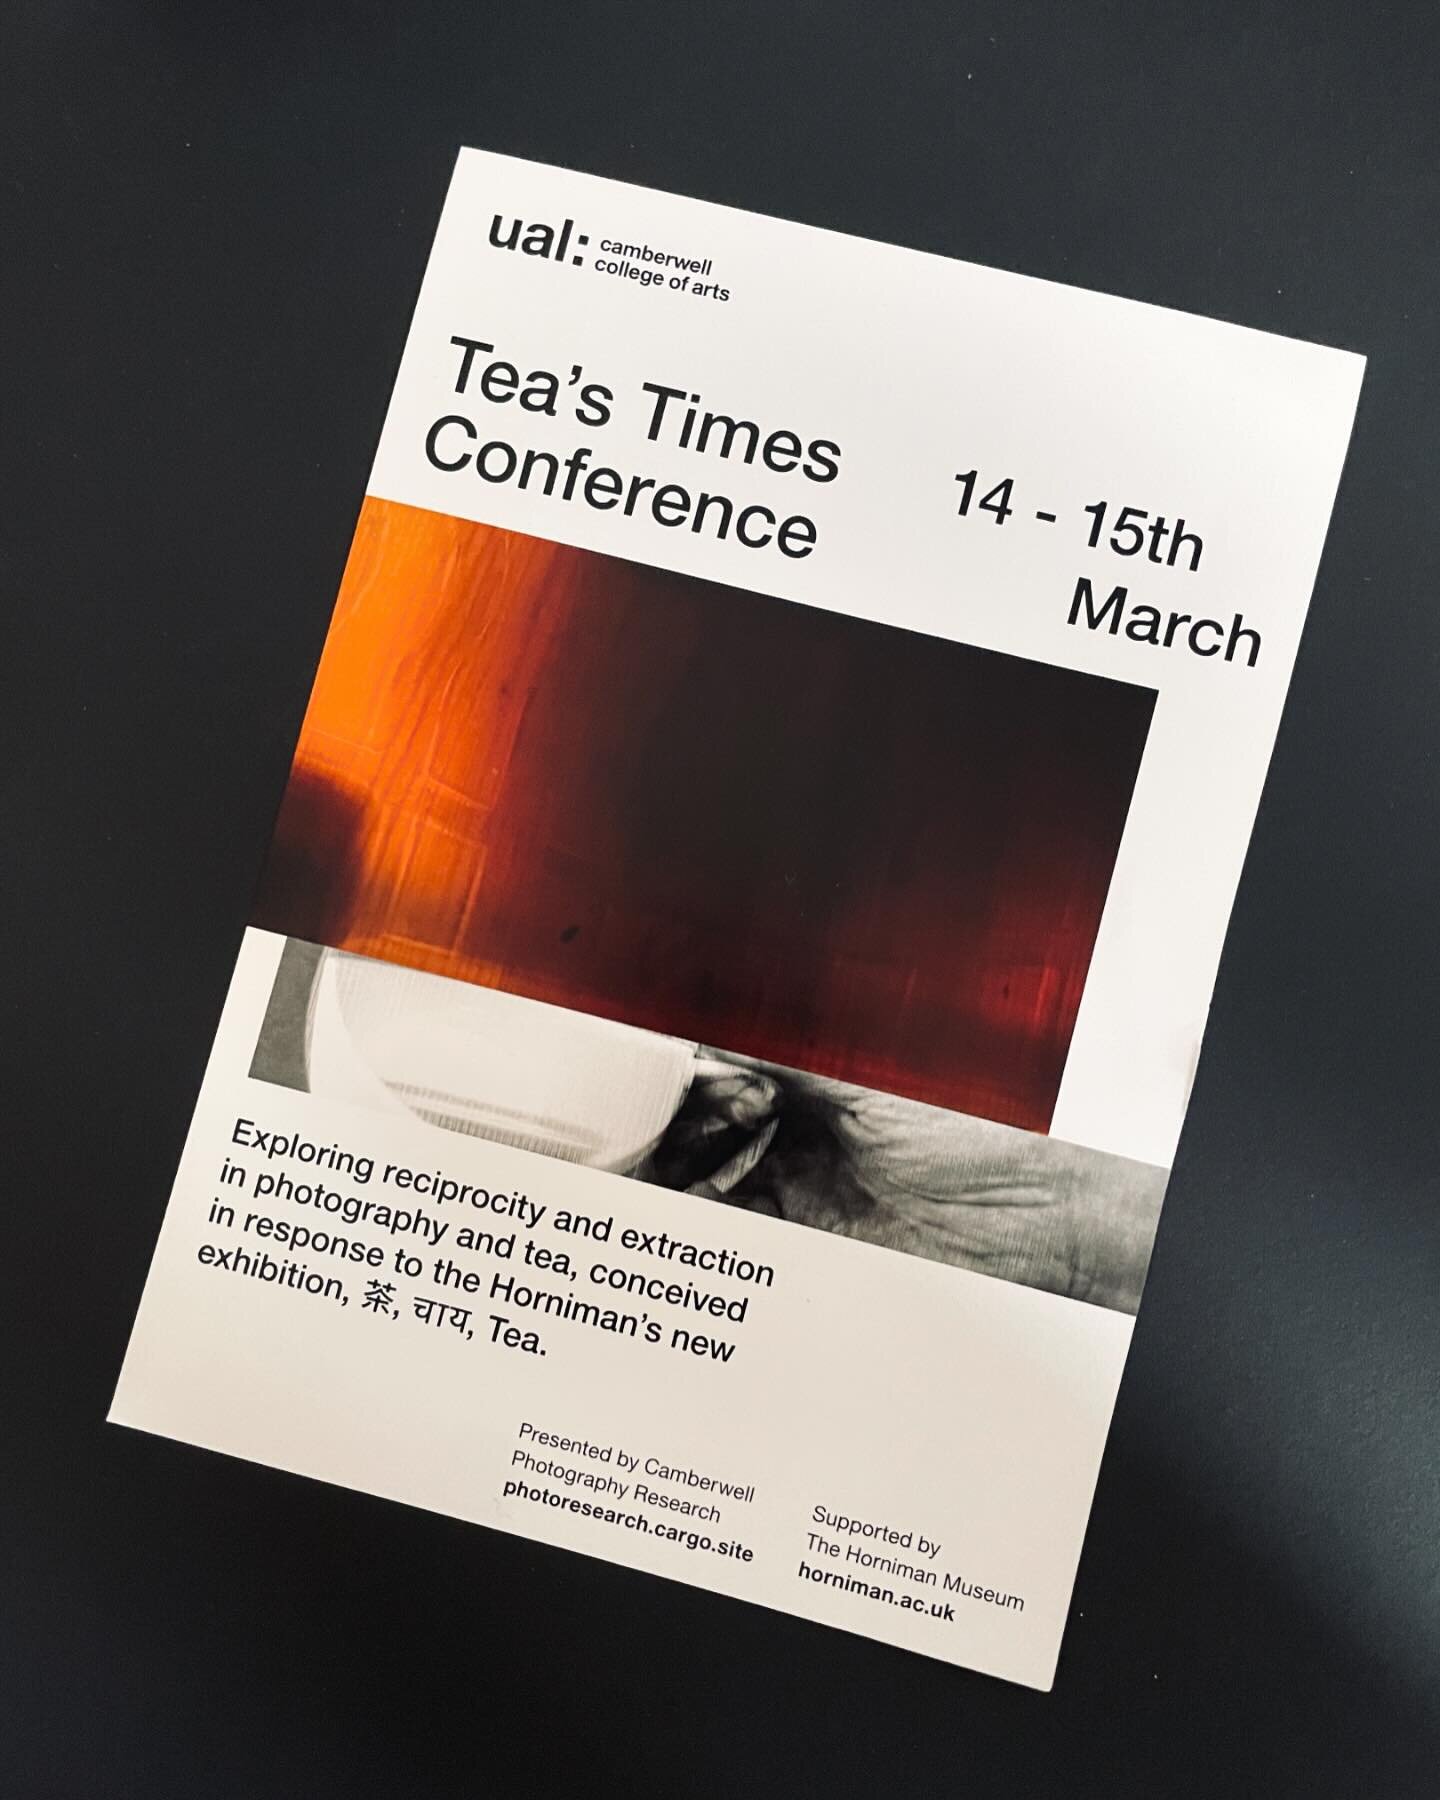 A really satisfying infusion of ideas at Horniman Museum and University of the Arts Tea&rsquo;s Times Conference this week at Camberwell College of Arts, London. 
It was a great pleasure to screen and discuss my #shortfilm &lsquo;Say When&rsquo; 

Th